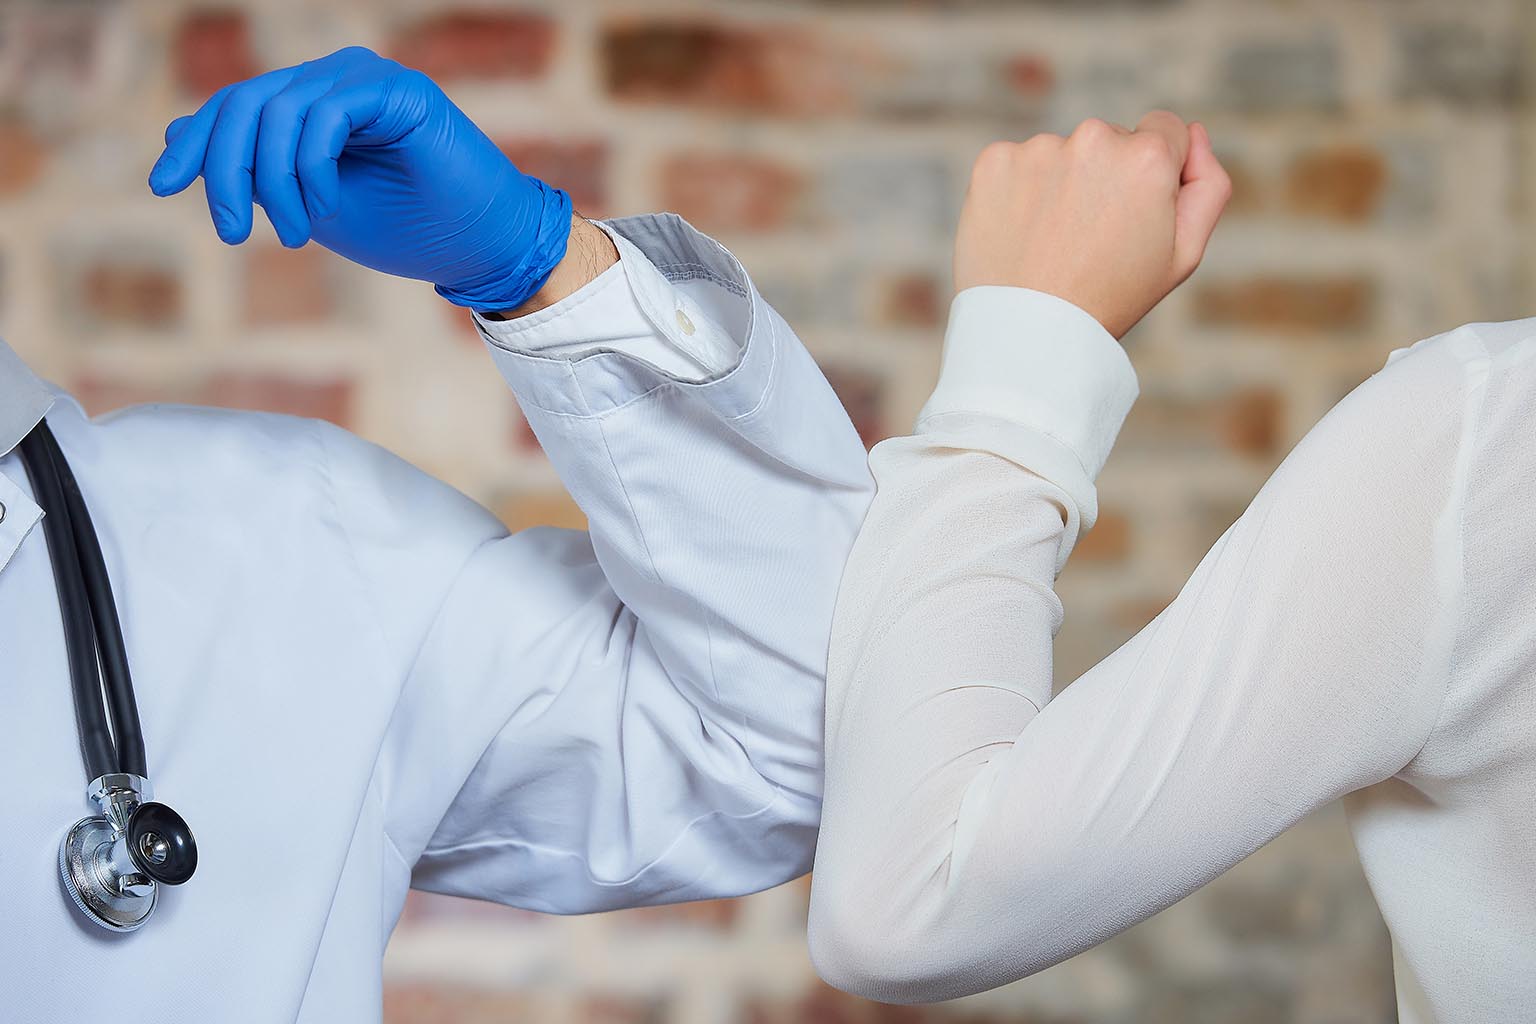 Close up of a physician elbow bumping a business person.